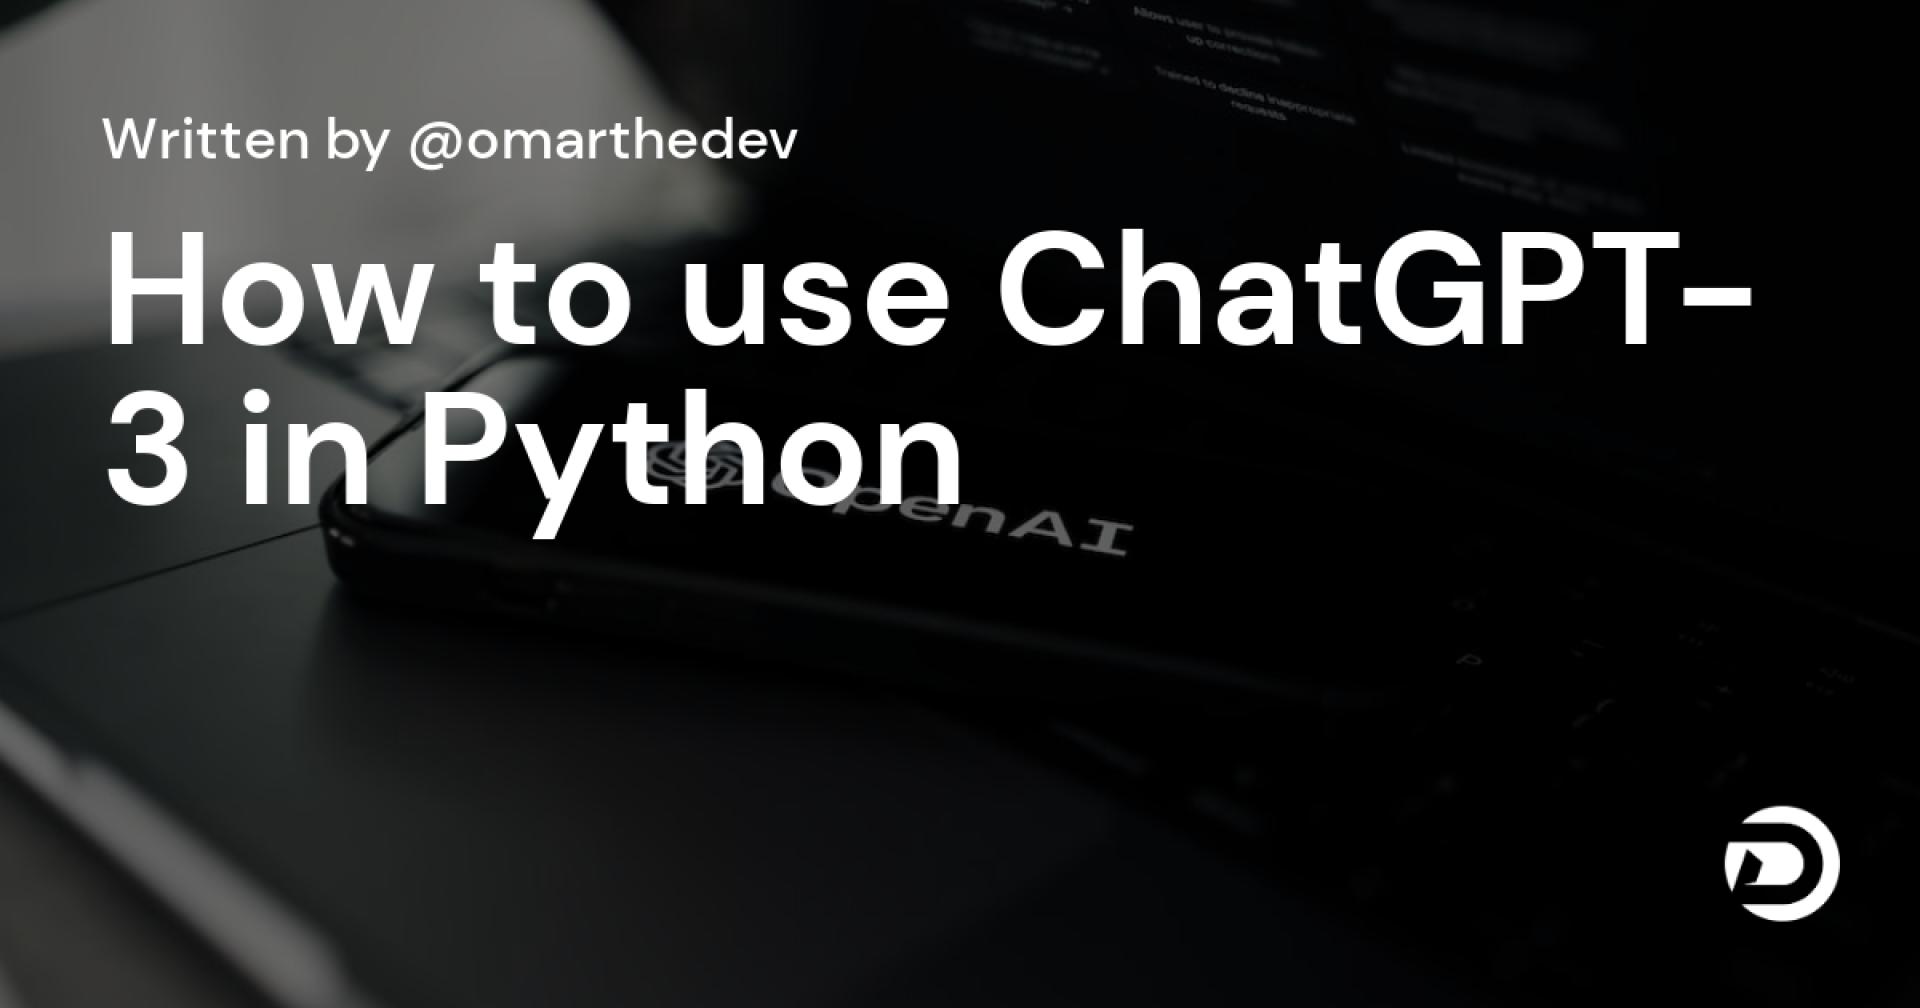  How to use ChatGPT-3 in Python